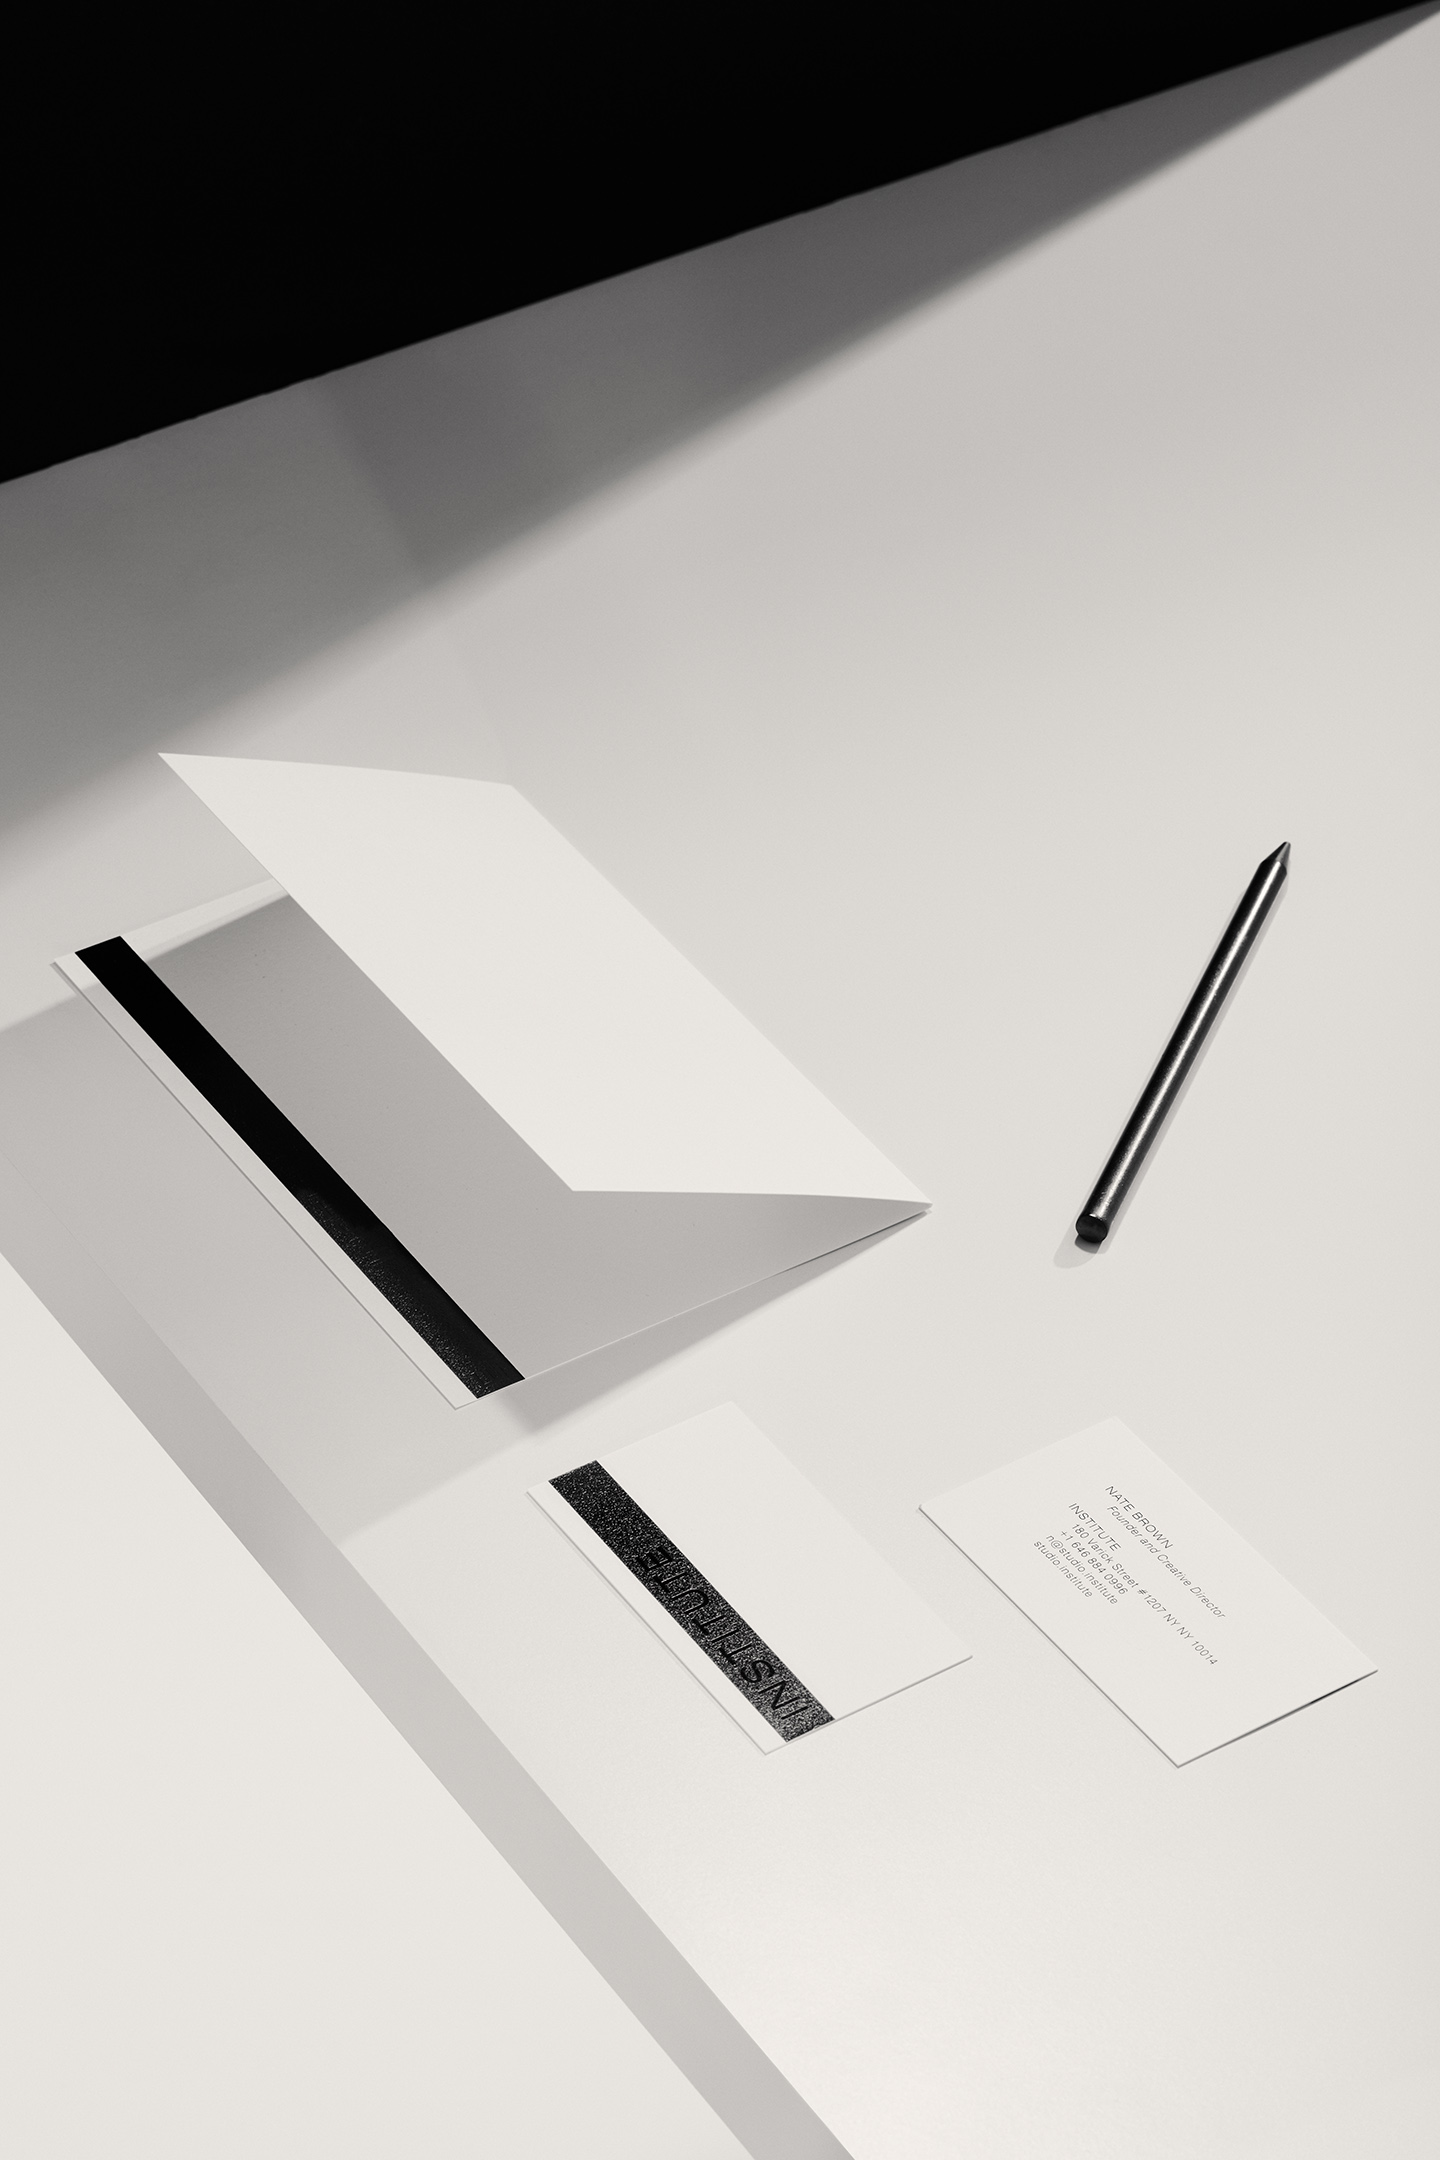 Logotype and stationery by Commission Studio for New York-based full service creative studio Institute